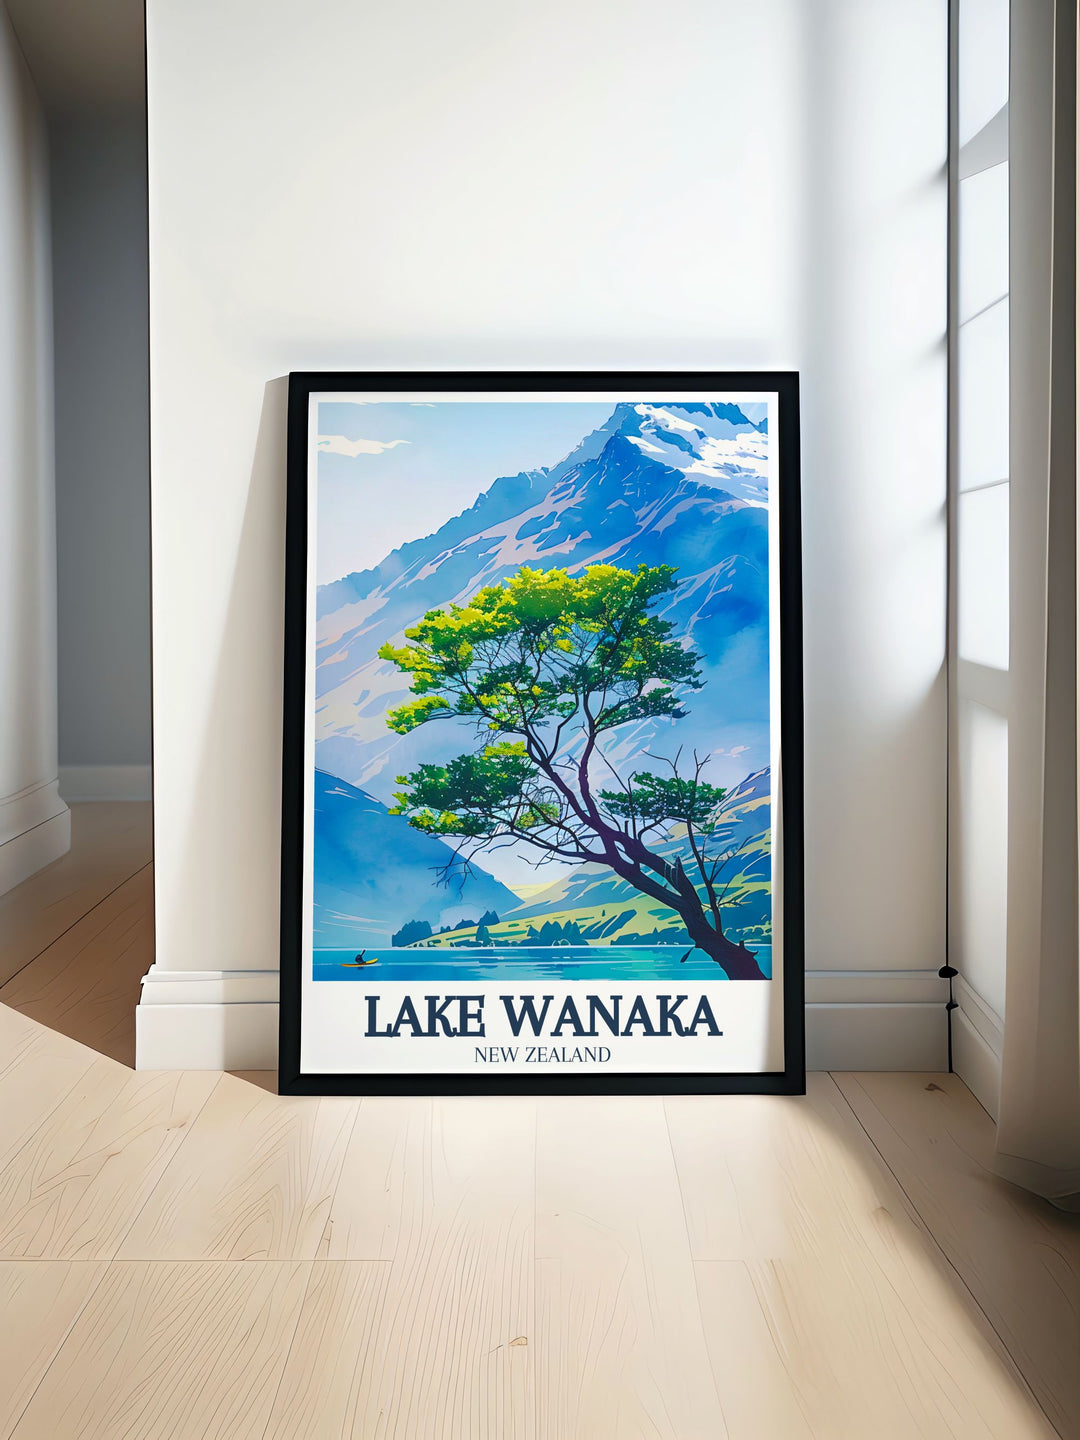 Beautiful New Zealand print featuring the iconic lake wanaka tree in Mount Aspiring National Park Perfect for adding a touch of tranquility to your home decor with its vibrant colors and stunning details